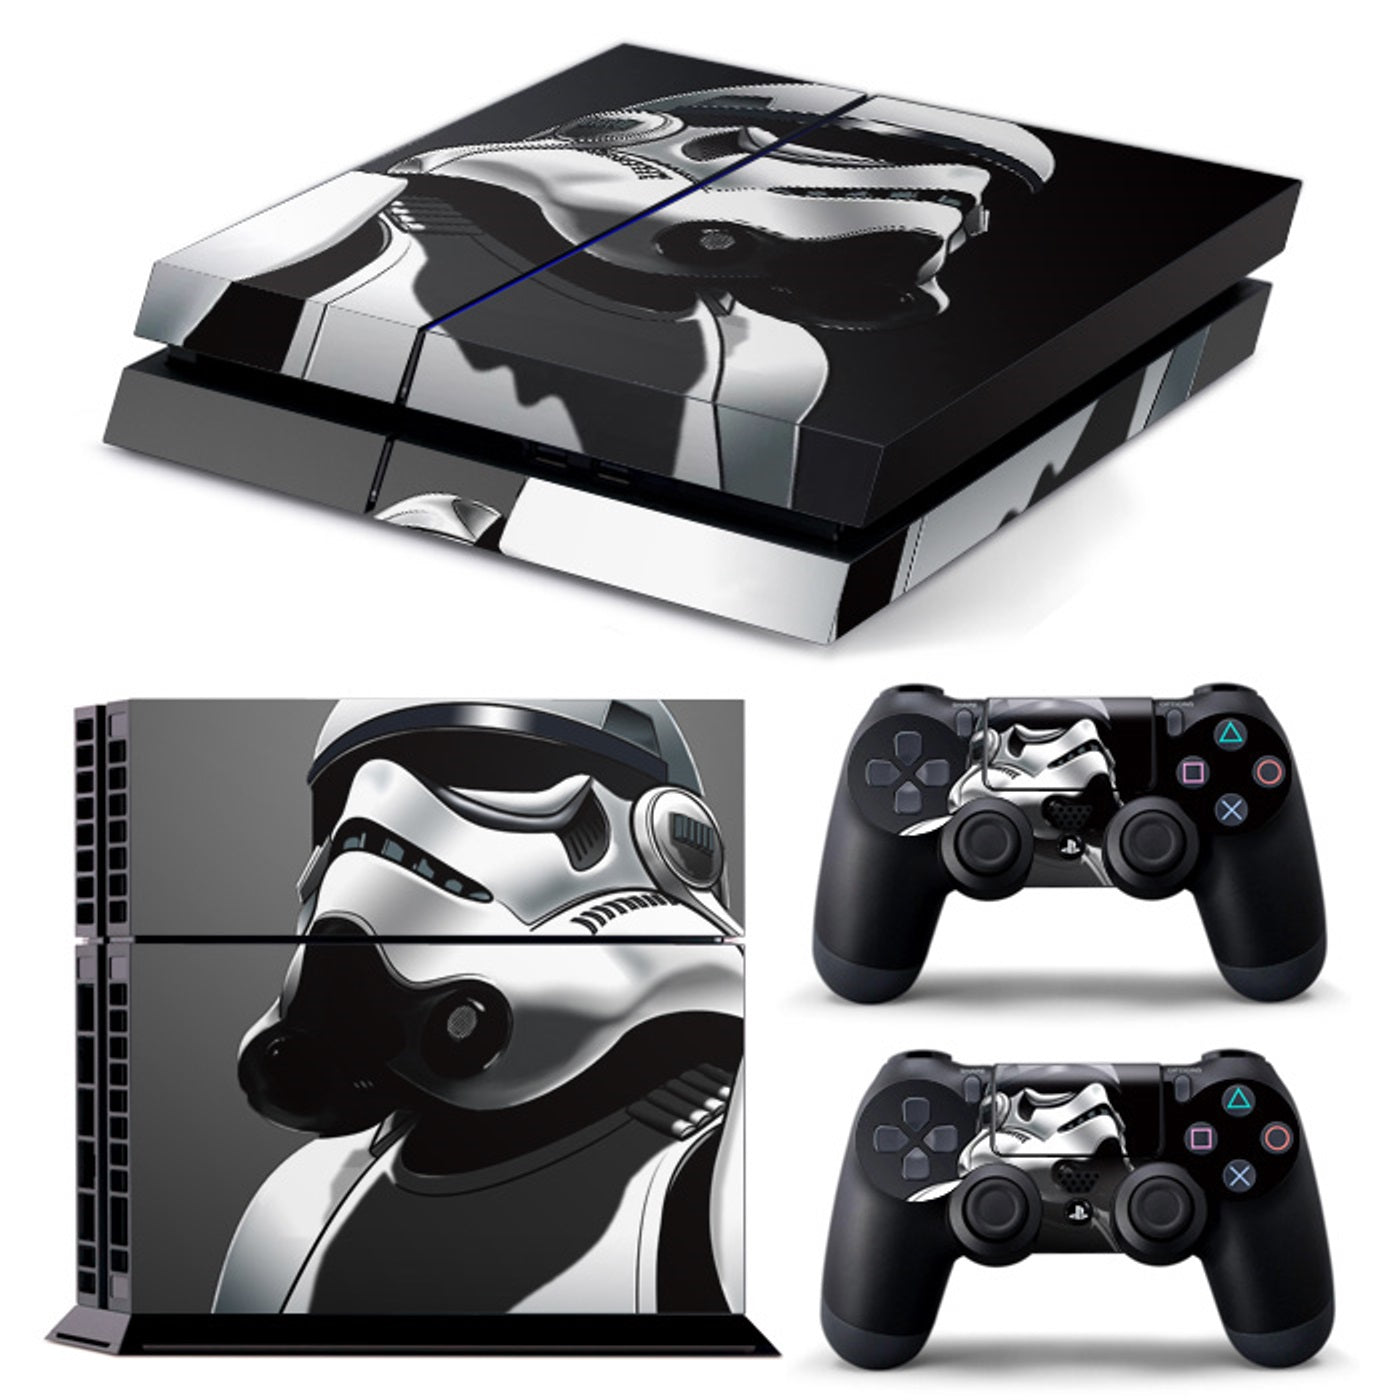 PS4 FULL BODY Accessory Wrap Sticker Skin Cover Decal for PS4 Playstation 4, ***Stormtrooper***